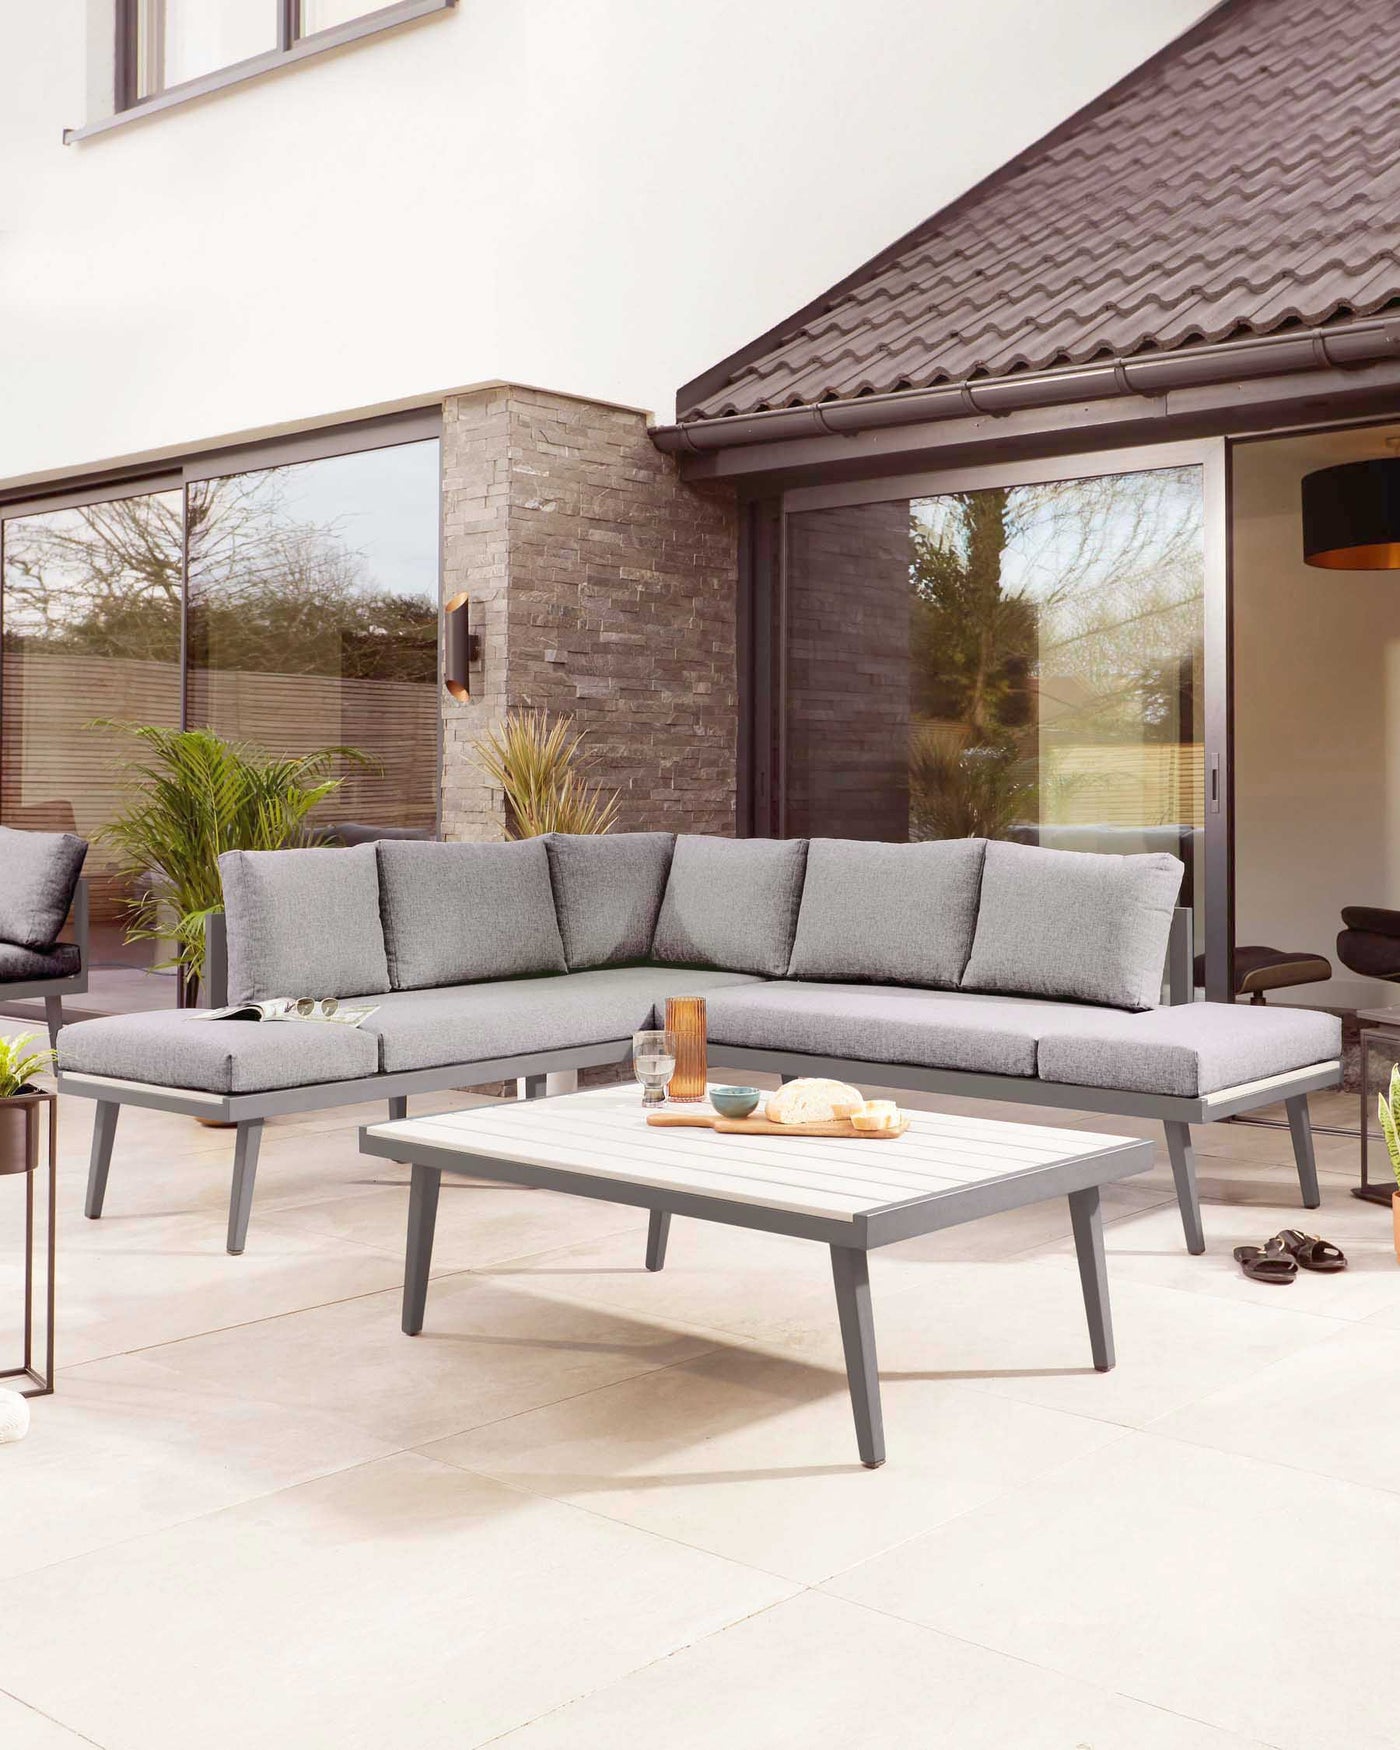 Modern outdoor lounge set featuring a sectional sofa with grey cushions and a sleek, grey aluminium frame, paired with a rectangular coffee table with a white tabletop and matching grey frame, all displayed on a patio setting.